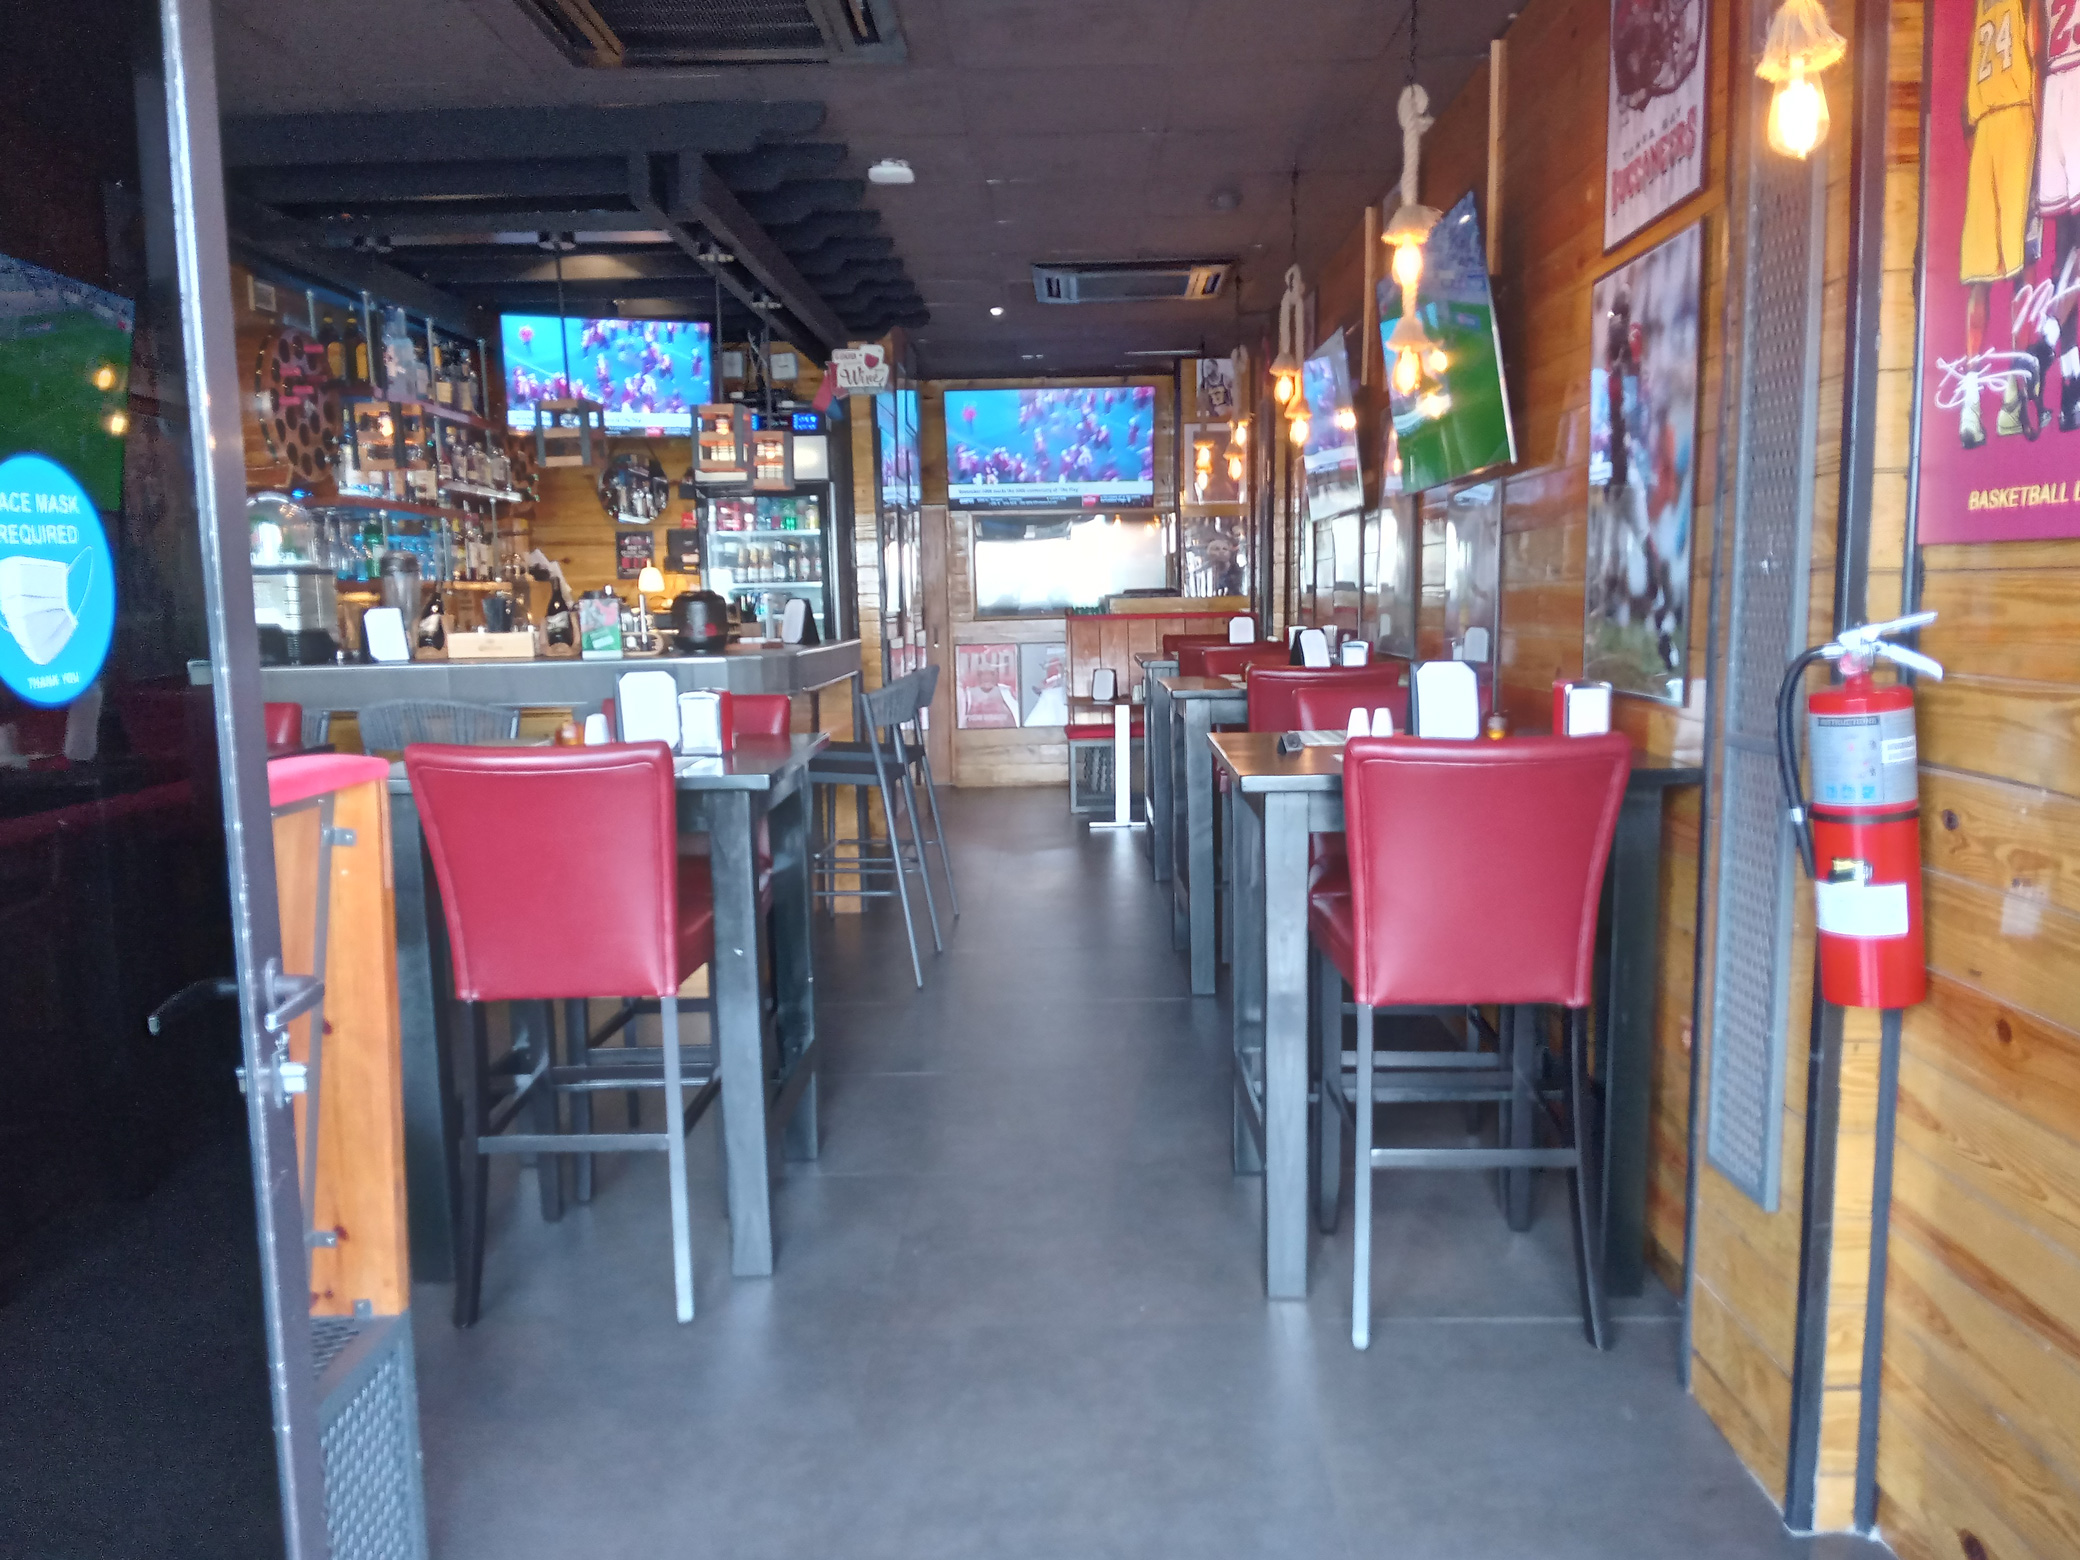 Sports Bar business for sale with license